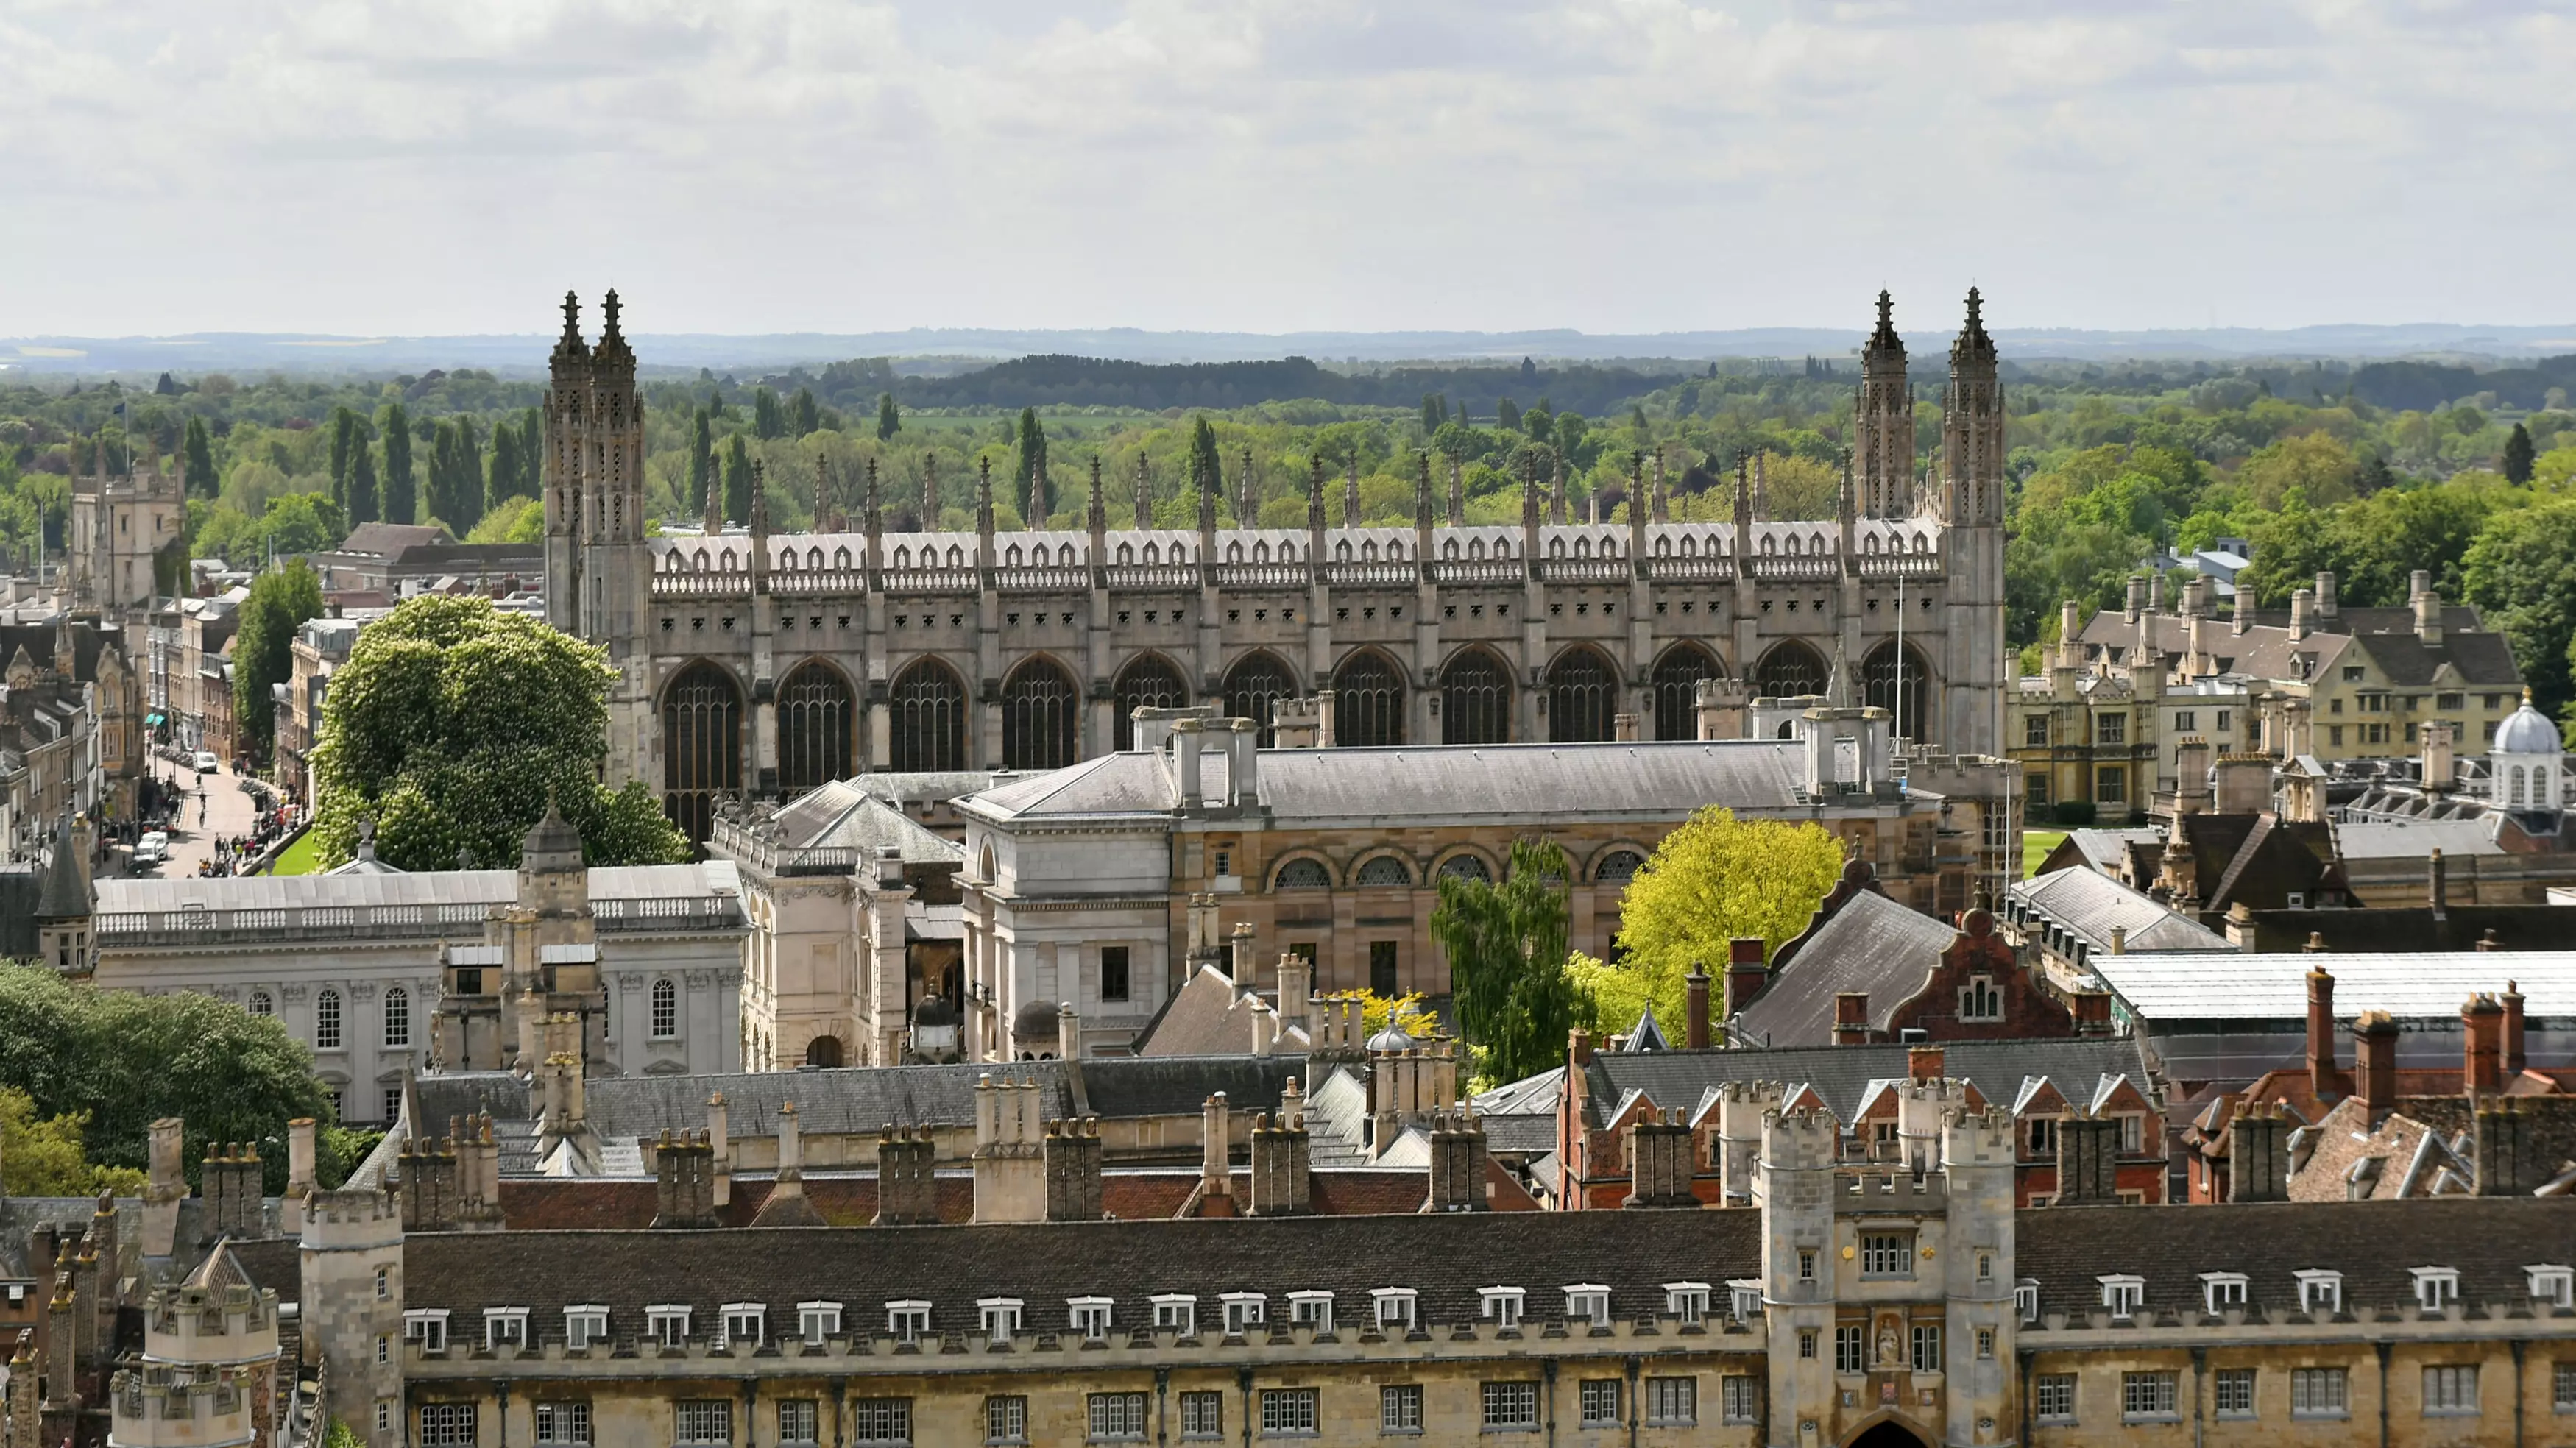 Cambridge University Will Keep All Lectures Online Until Summer 2021